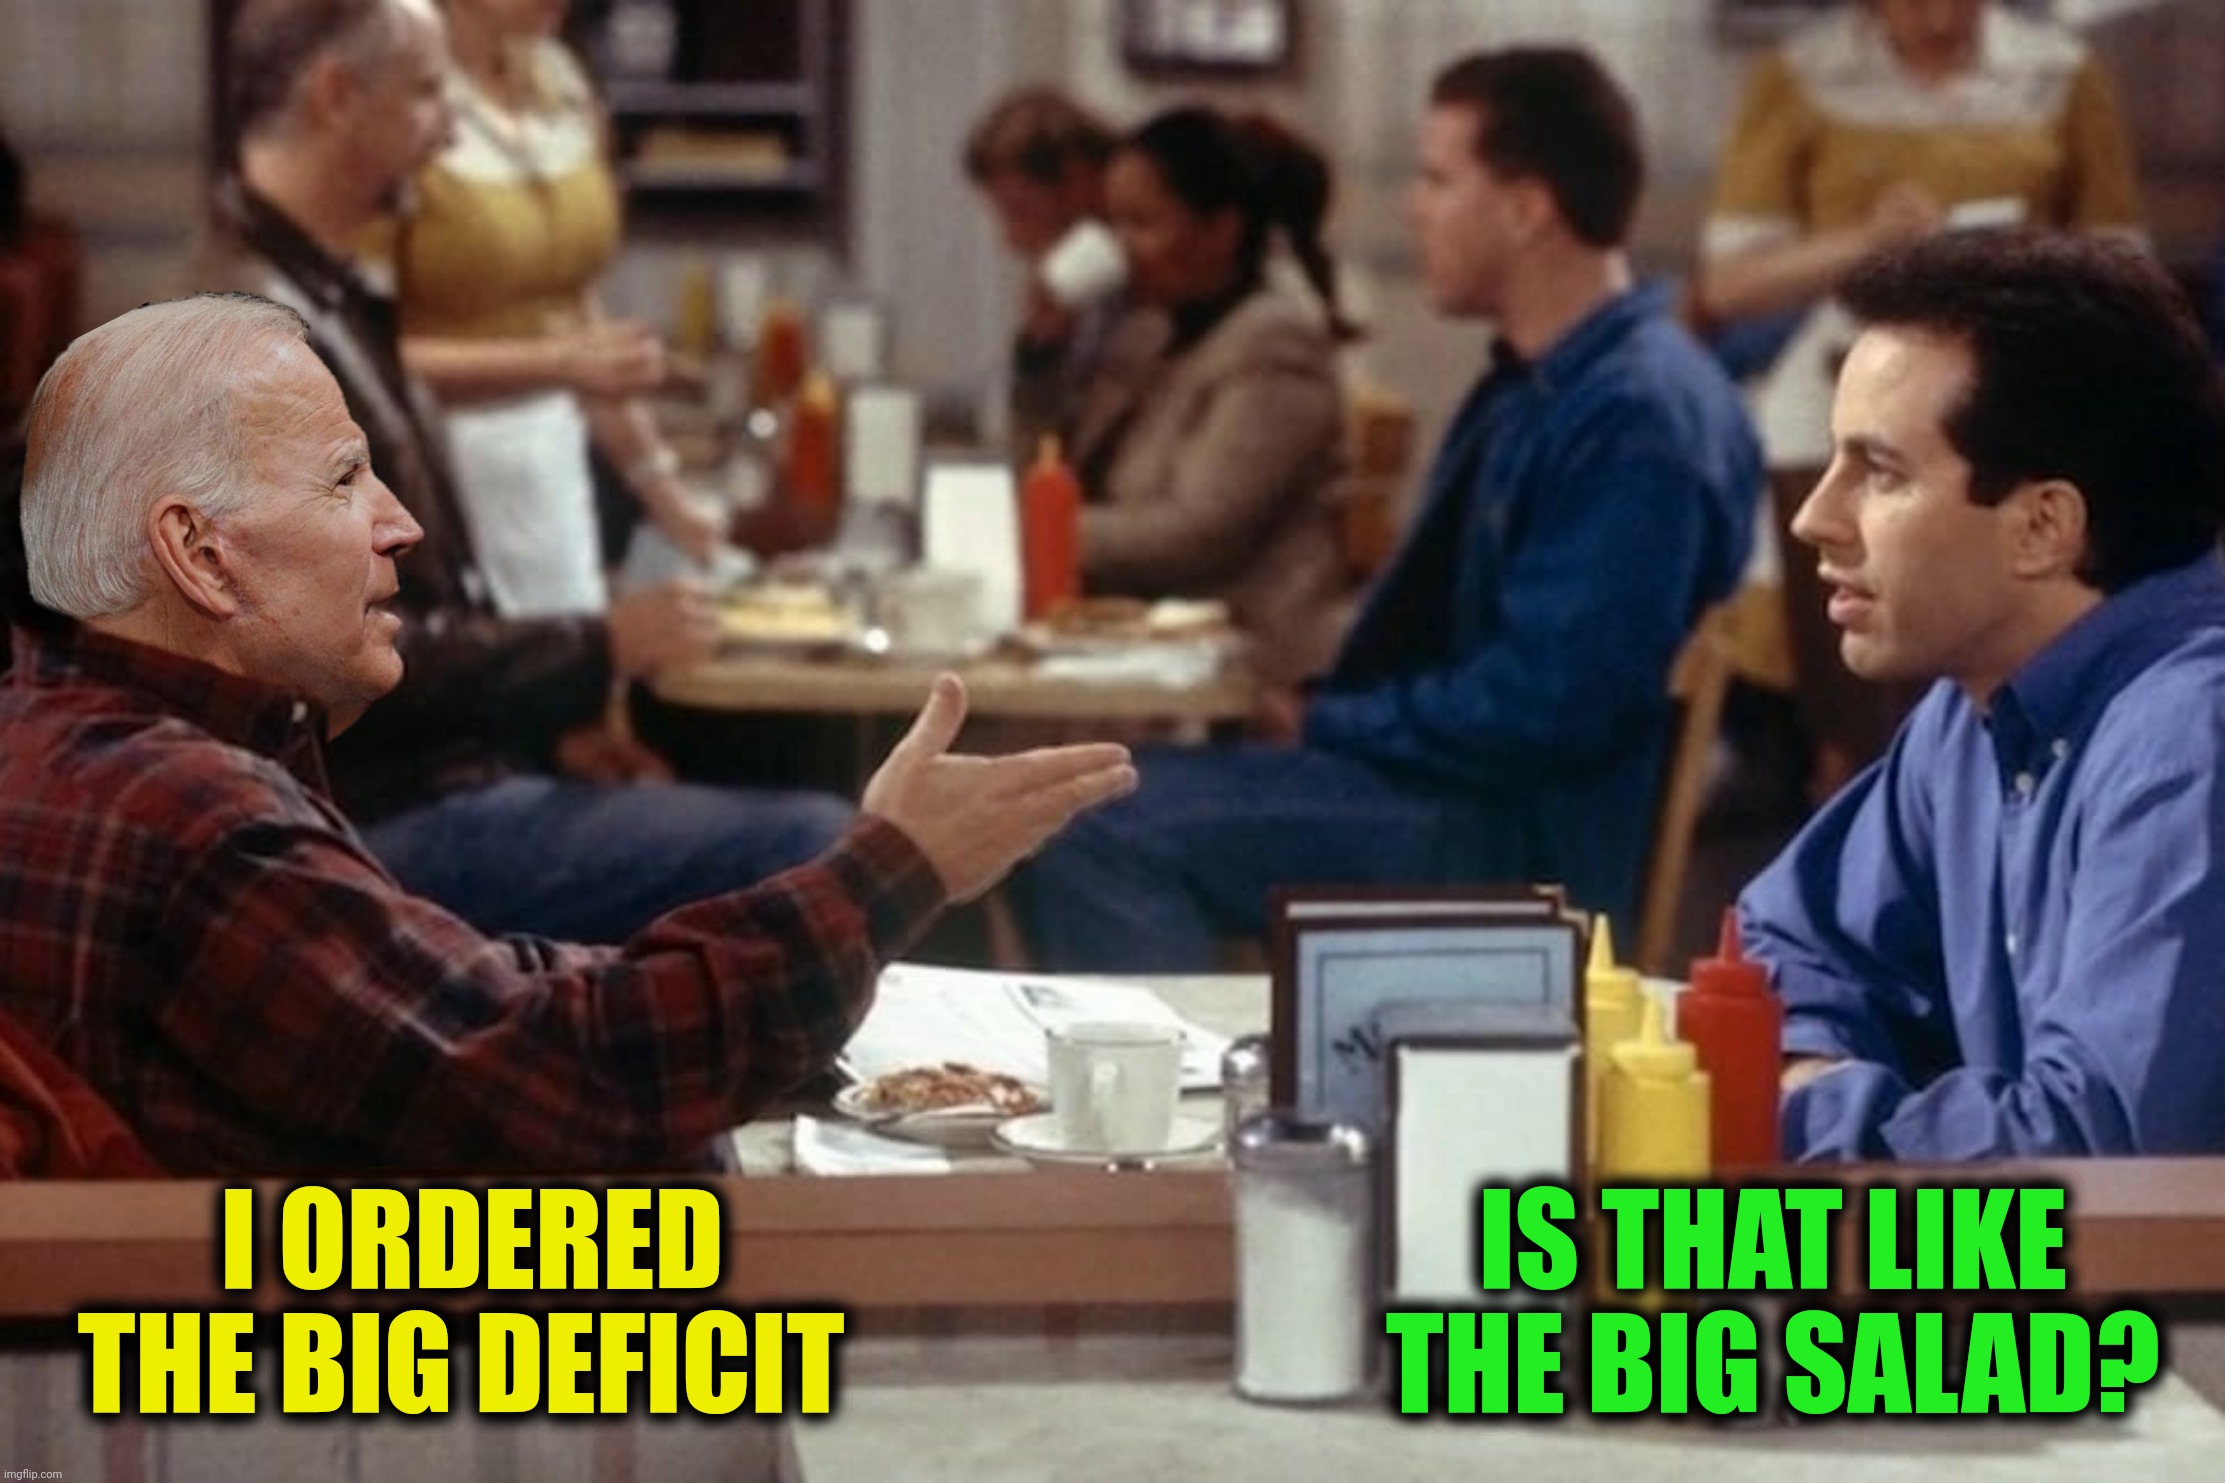 I ORDERED THE BIG DEFICIT IS THAT LIKE THE BIG SALAD? | made w/ Imgflip meme maker